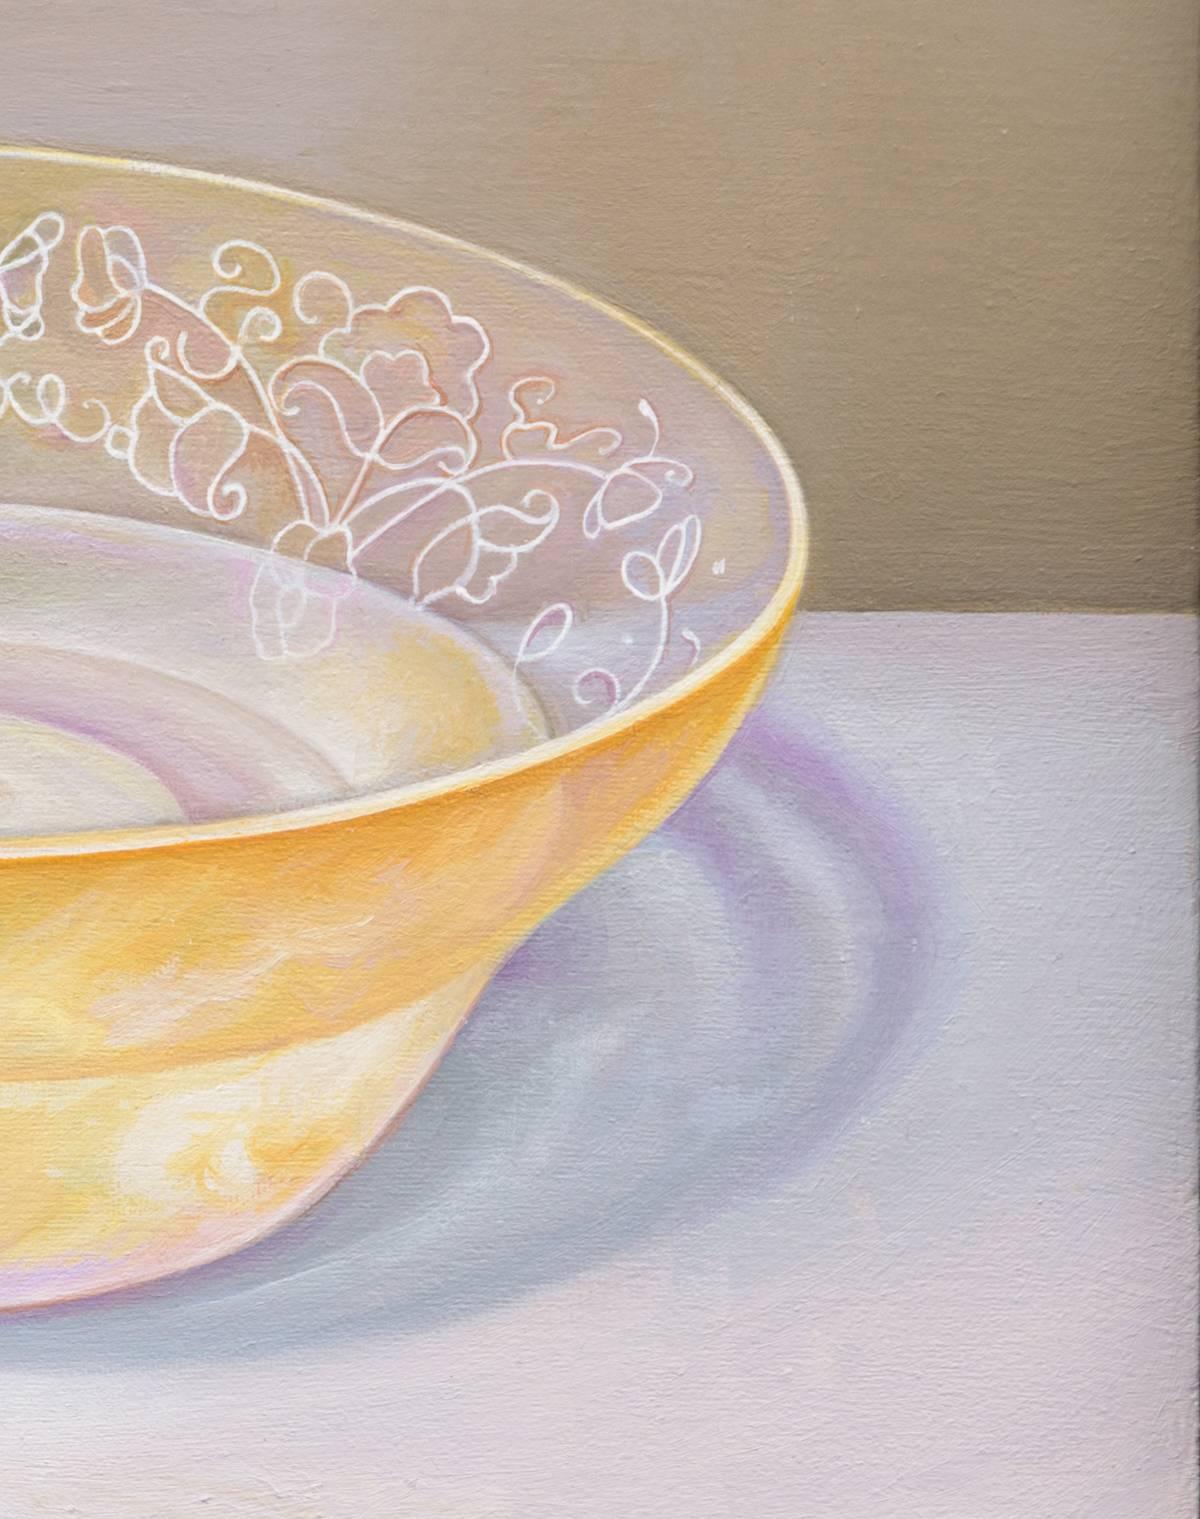 Ordinary Time, Depression Glass Bowl Painting   - American Realist Art by Laura Lasworth